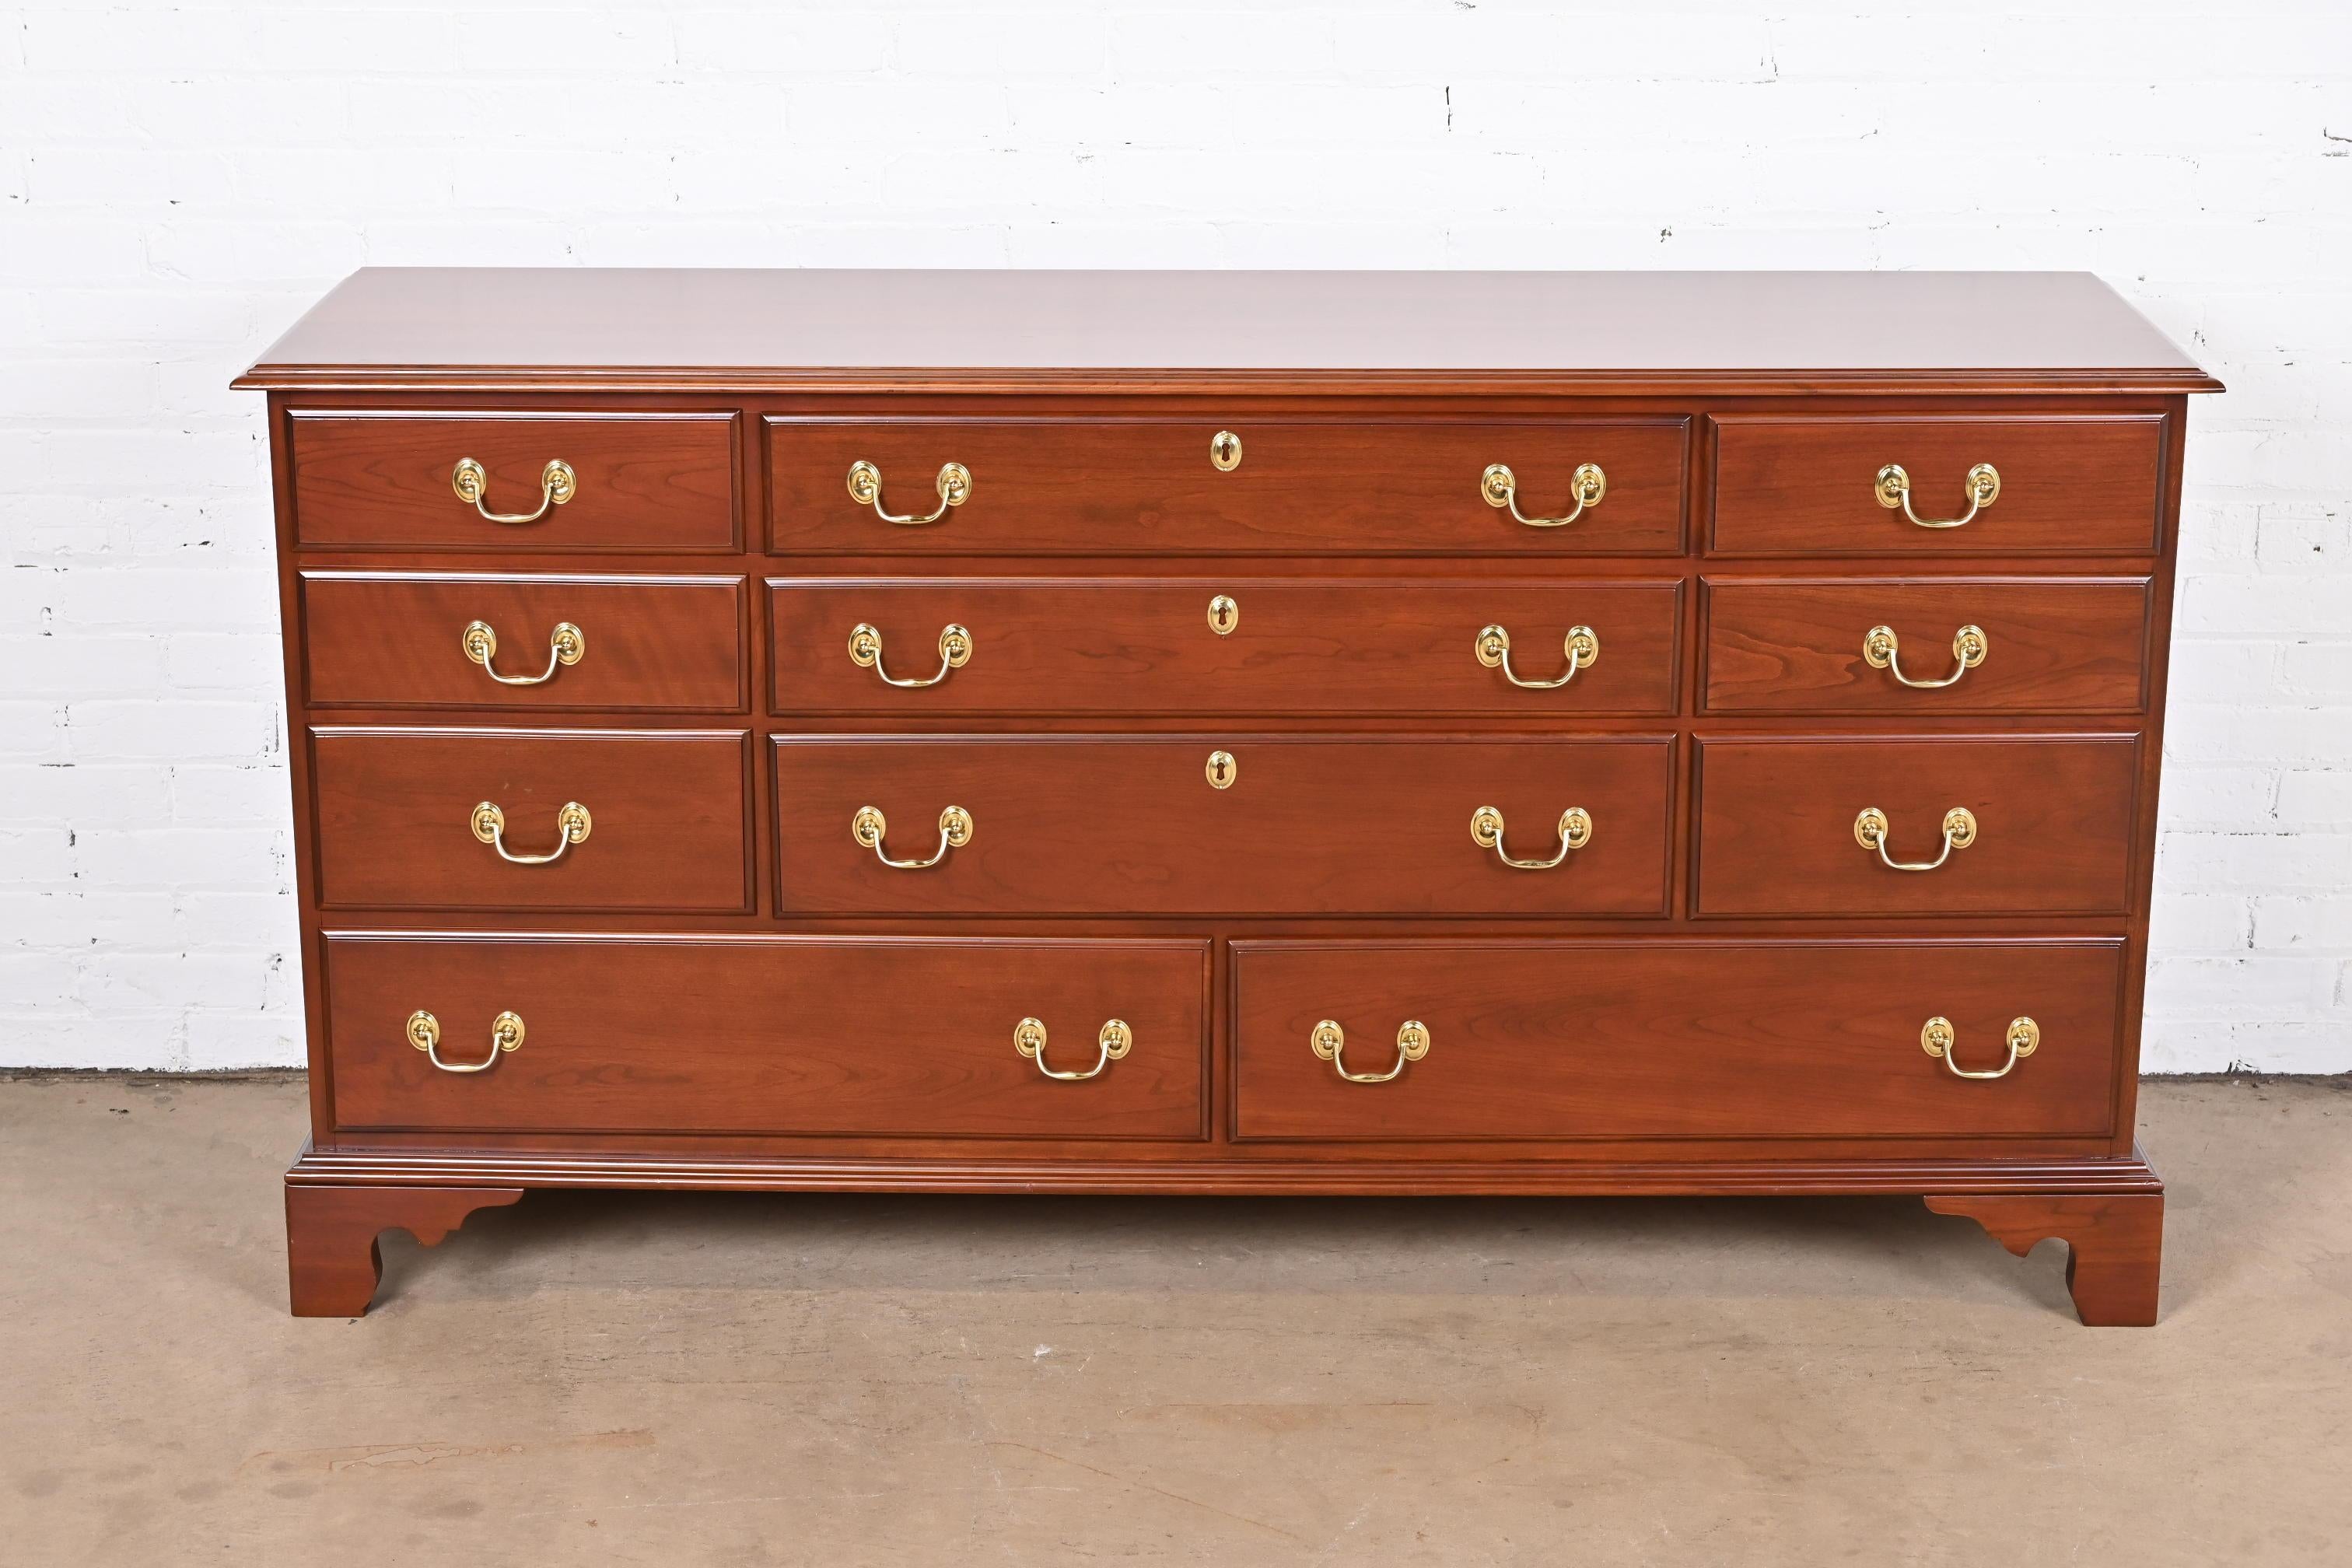 An exceptional Georgian or Chippendale style eleven-drawer long dresser or credenza

By Harden Furniture

USA, Late 20th Century

Solid cherry wood, with original brass hardware.

Measures: 66